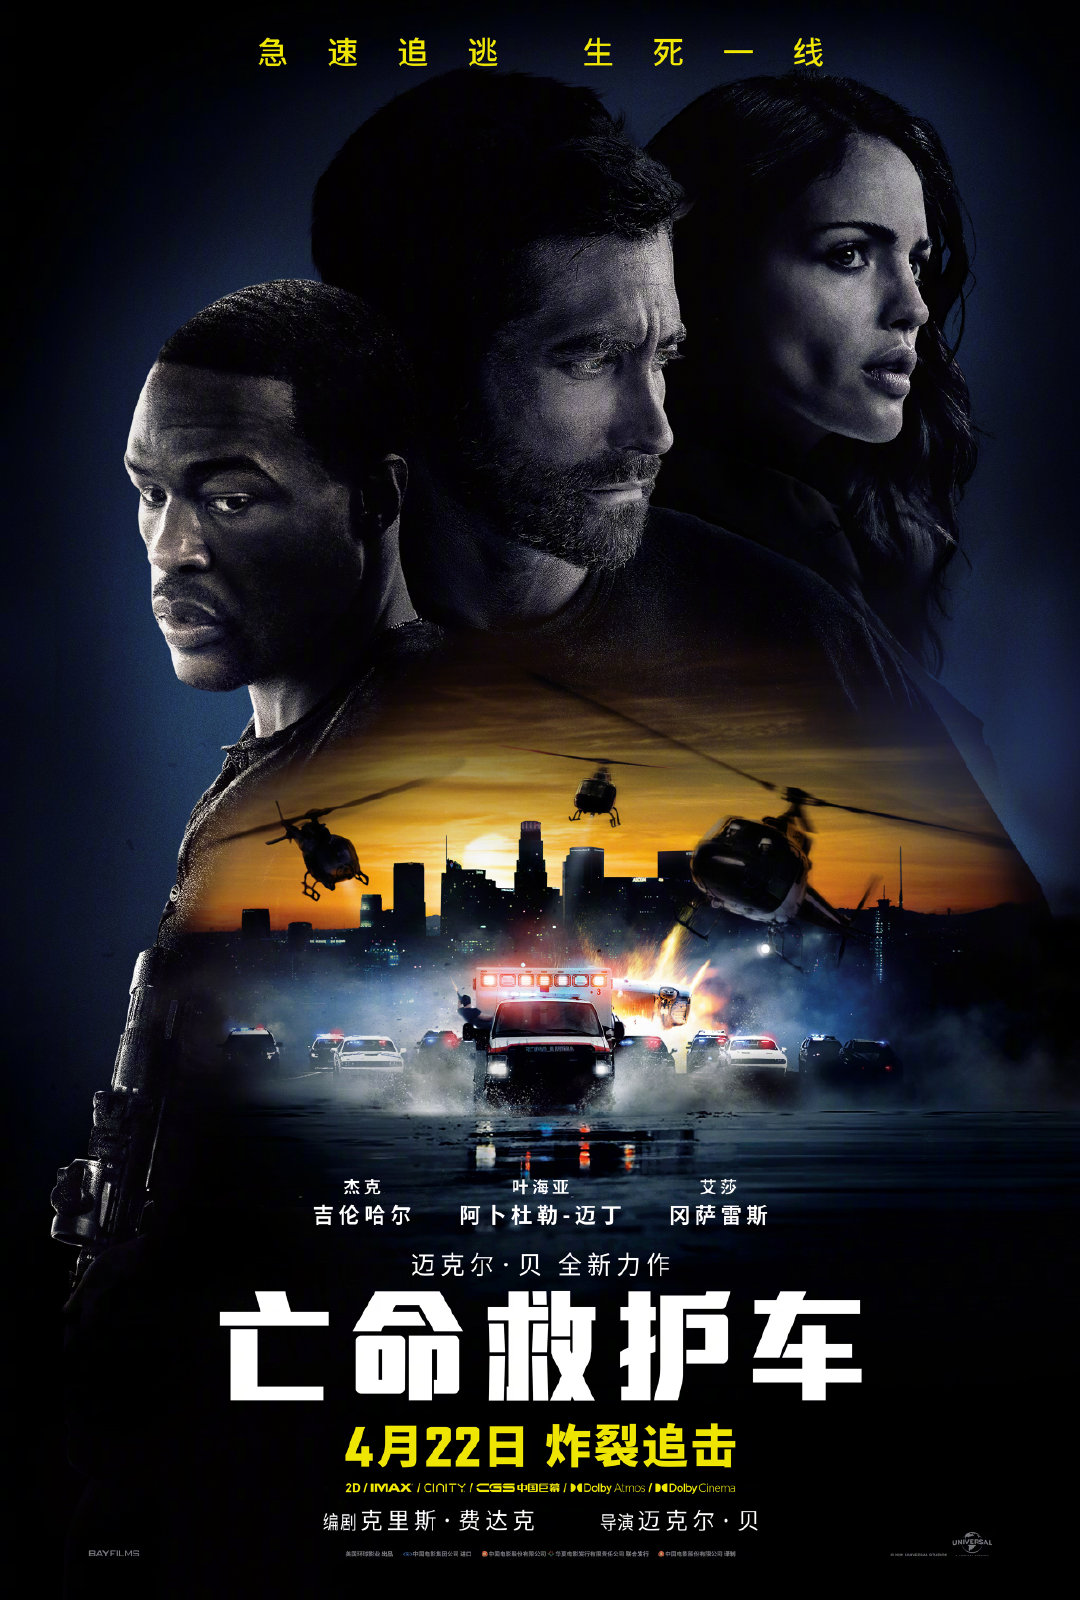 "Desperate Ambulance" set for April 22 in mainland China